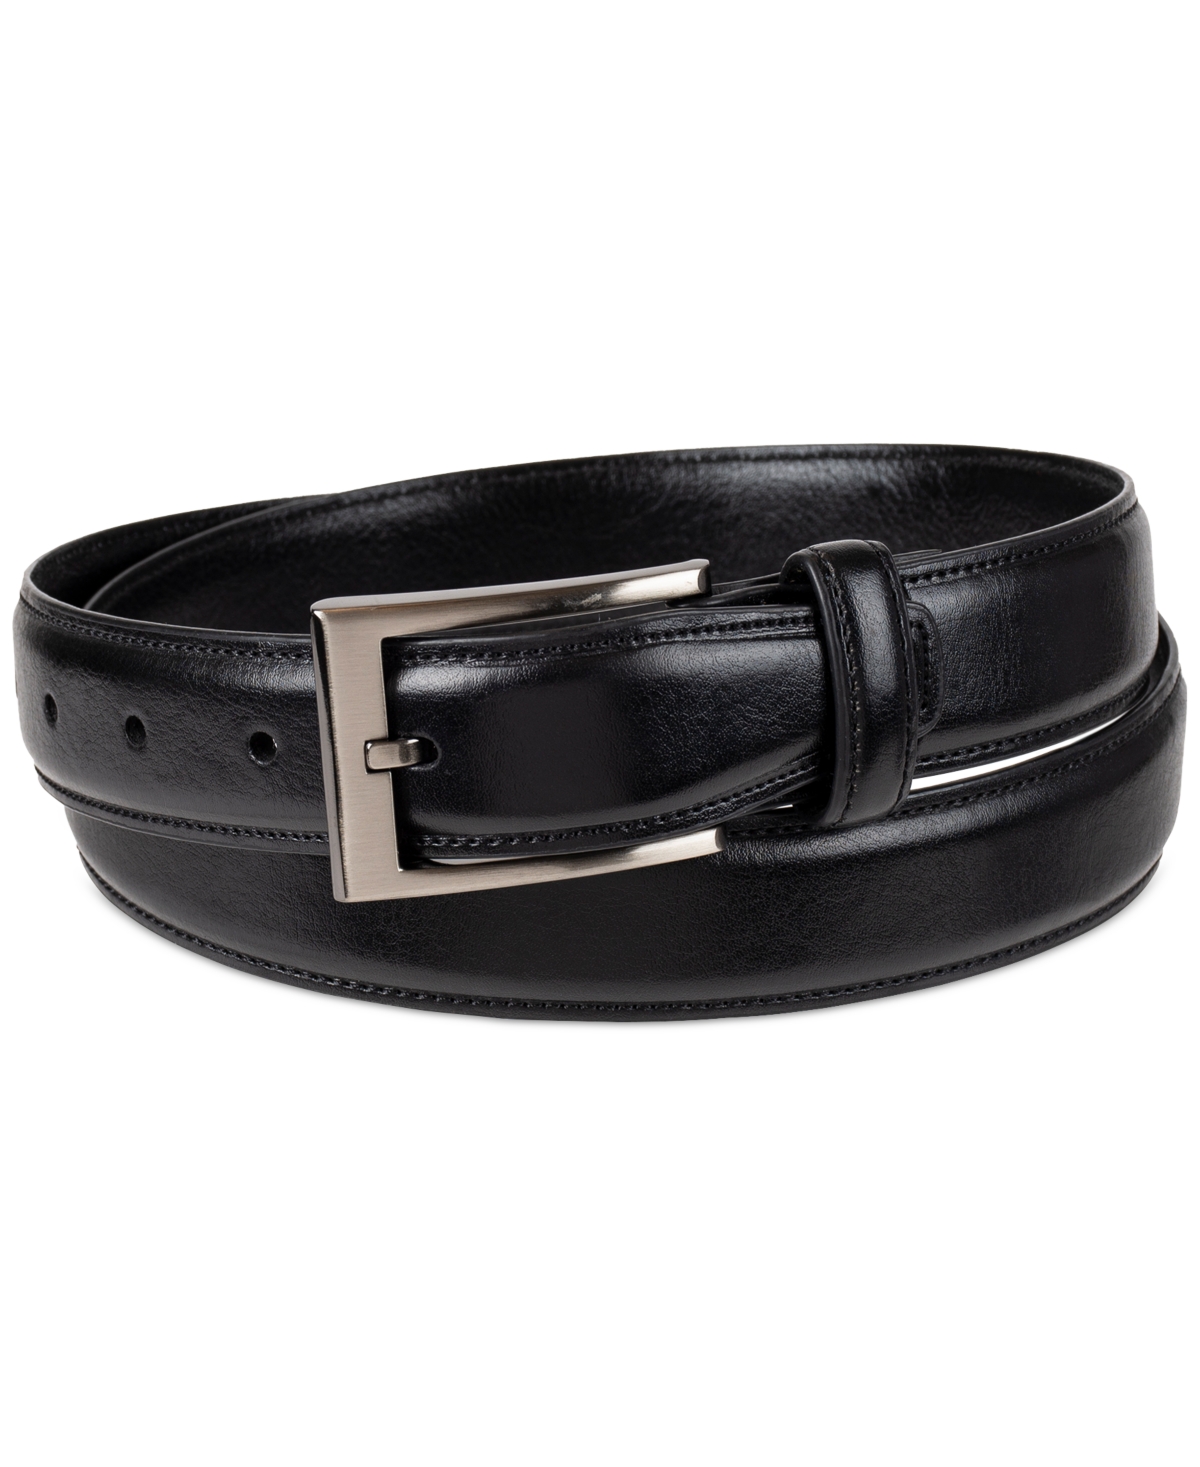 Men's Edge Stitched Belt, Created for Macy's - Black